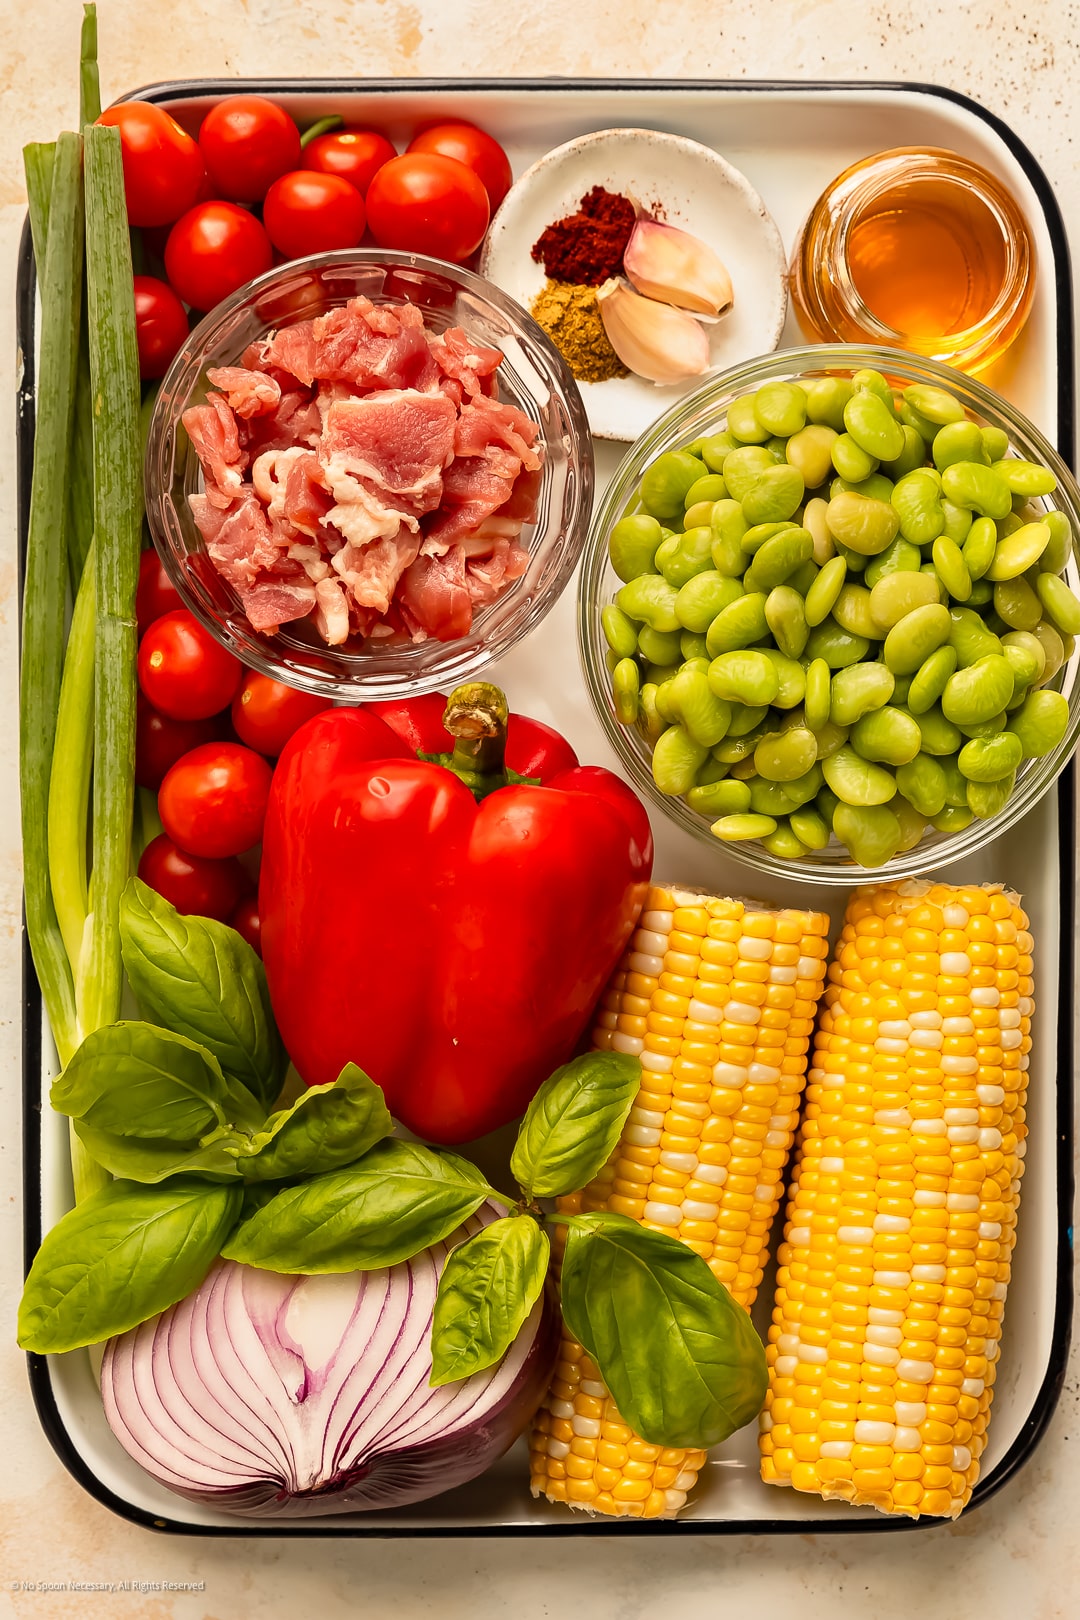 Overhead photo of the ingredients to make succotash - corn, lima beans, tomatoes, bell pepper, onion and fresh herbs - neatly organized on a kitchen tray.